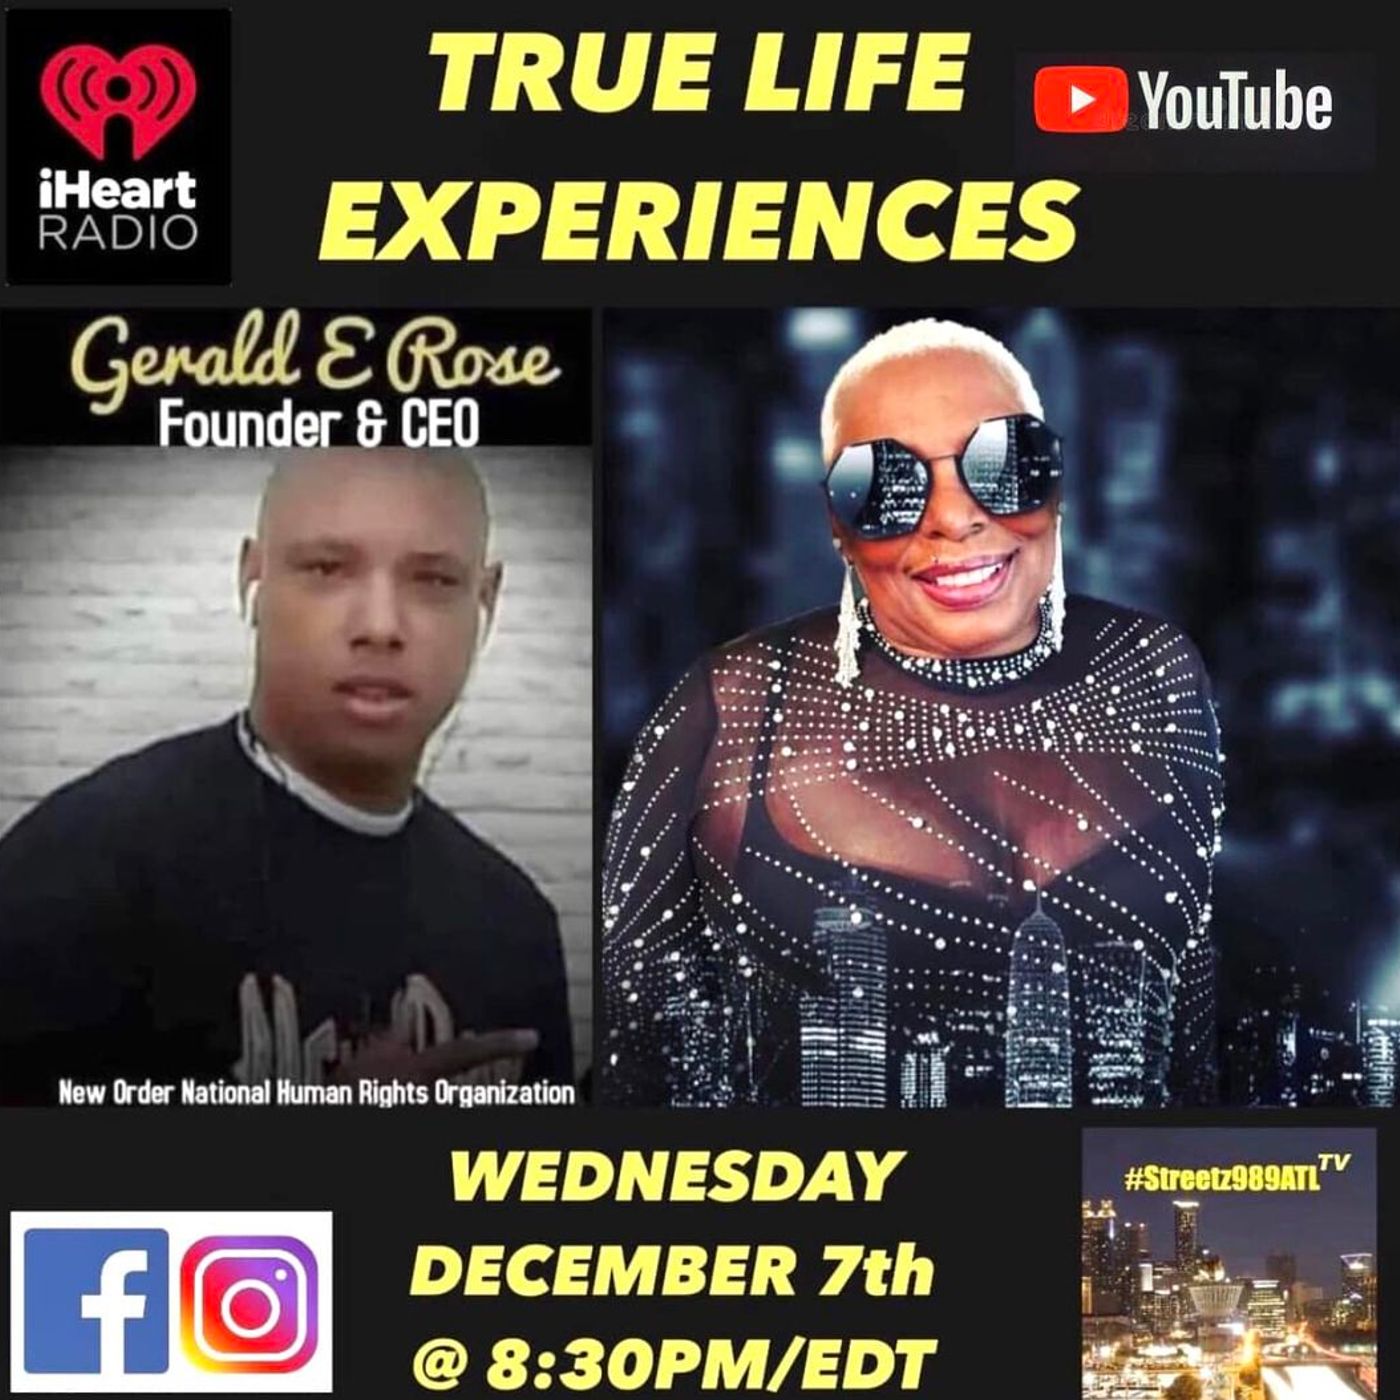 TRUE LIFE EXPERIENCES - GERALD E. ROSE - NEW ORDER NATIONAL HUMAN RIGHTS ORGANIZATION - SHARES ON STREETZ989ATLTV